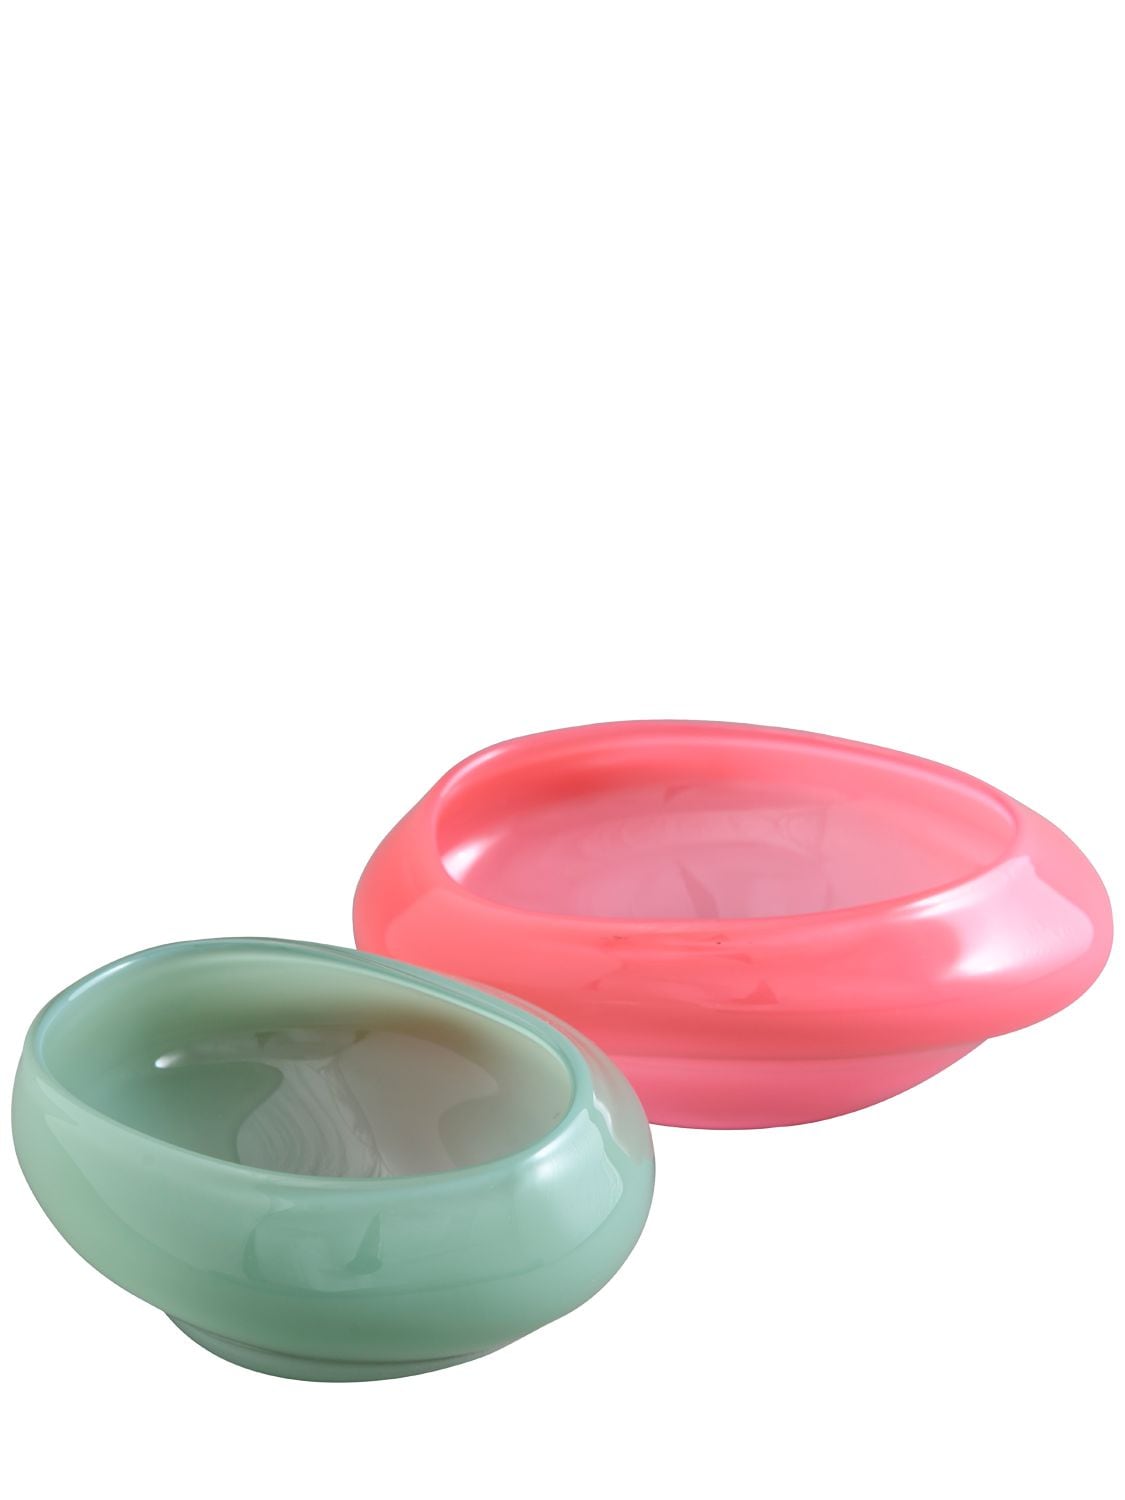 Image of Set Of 2 Candy Bowls